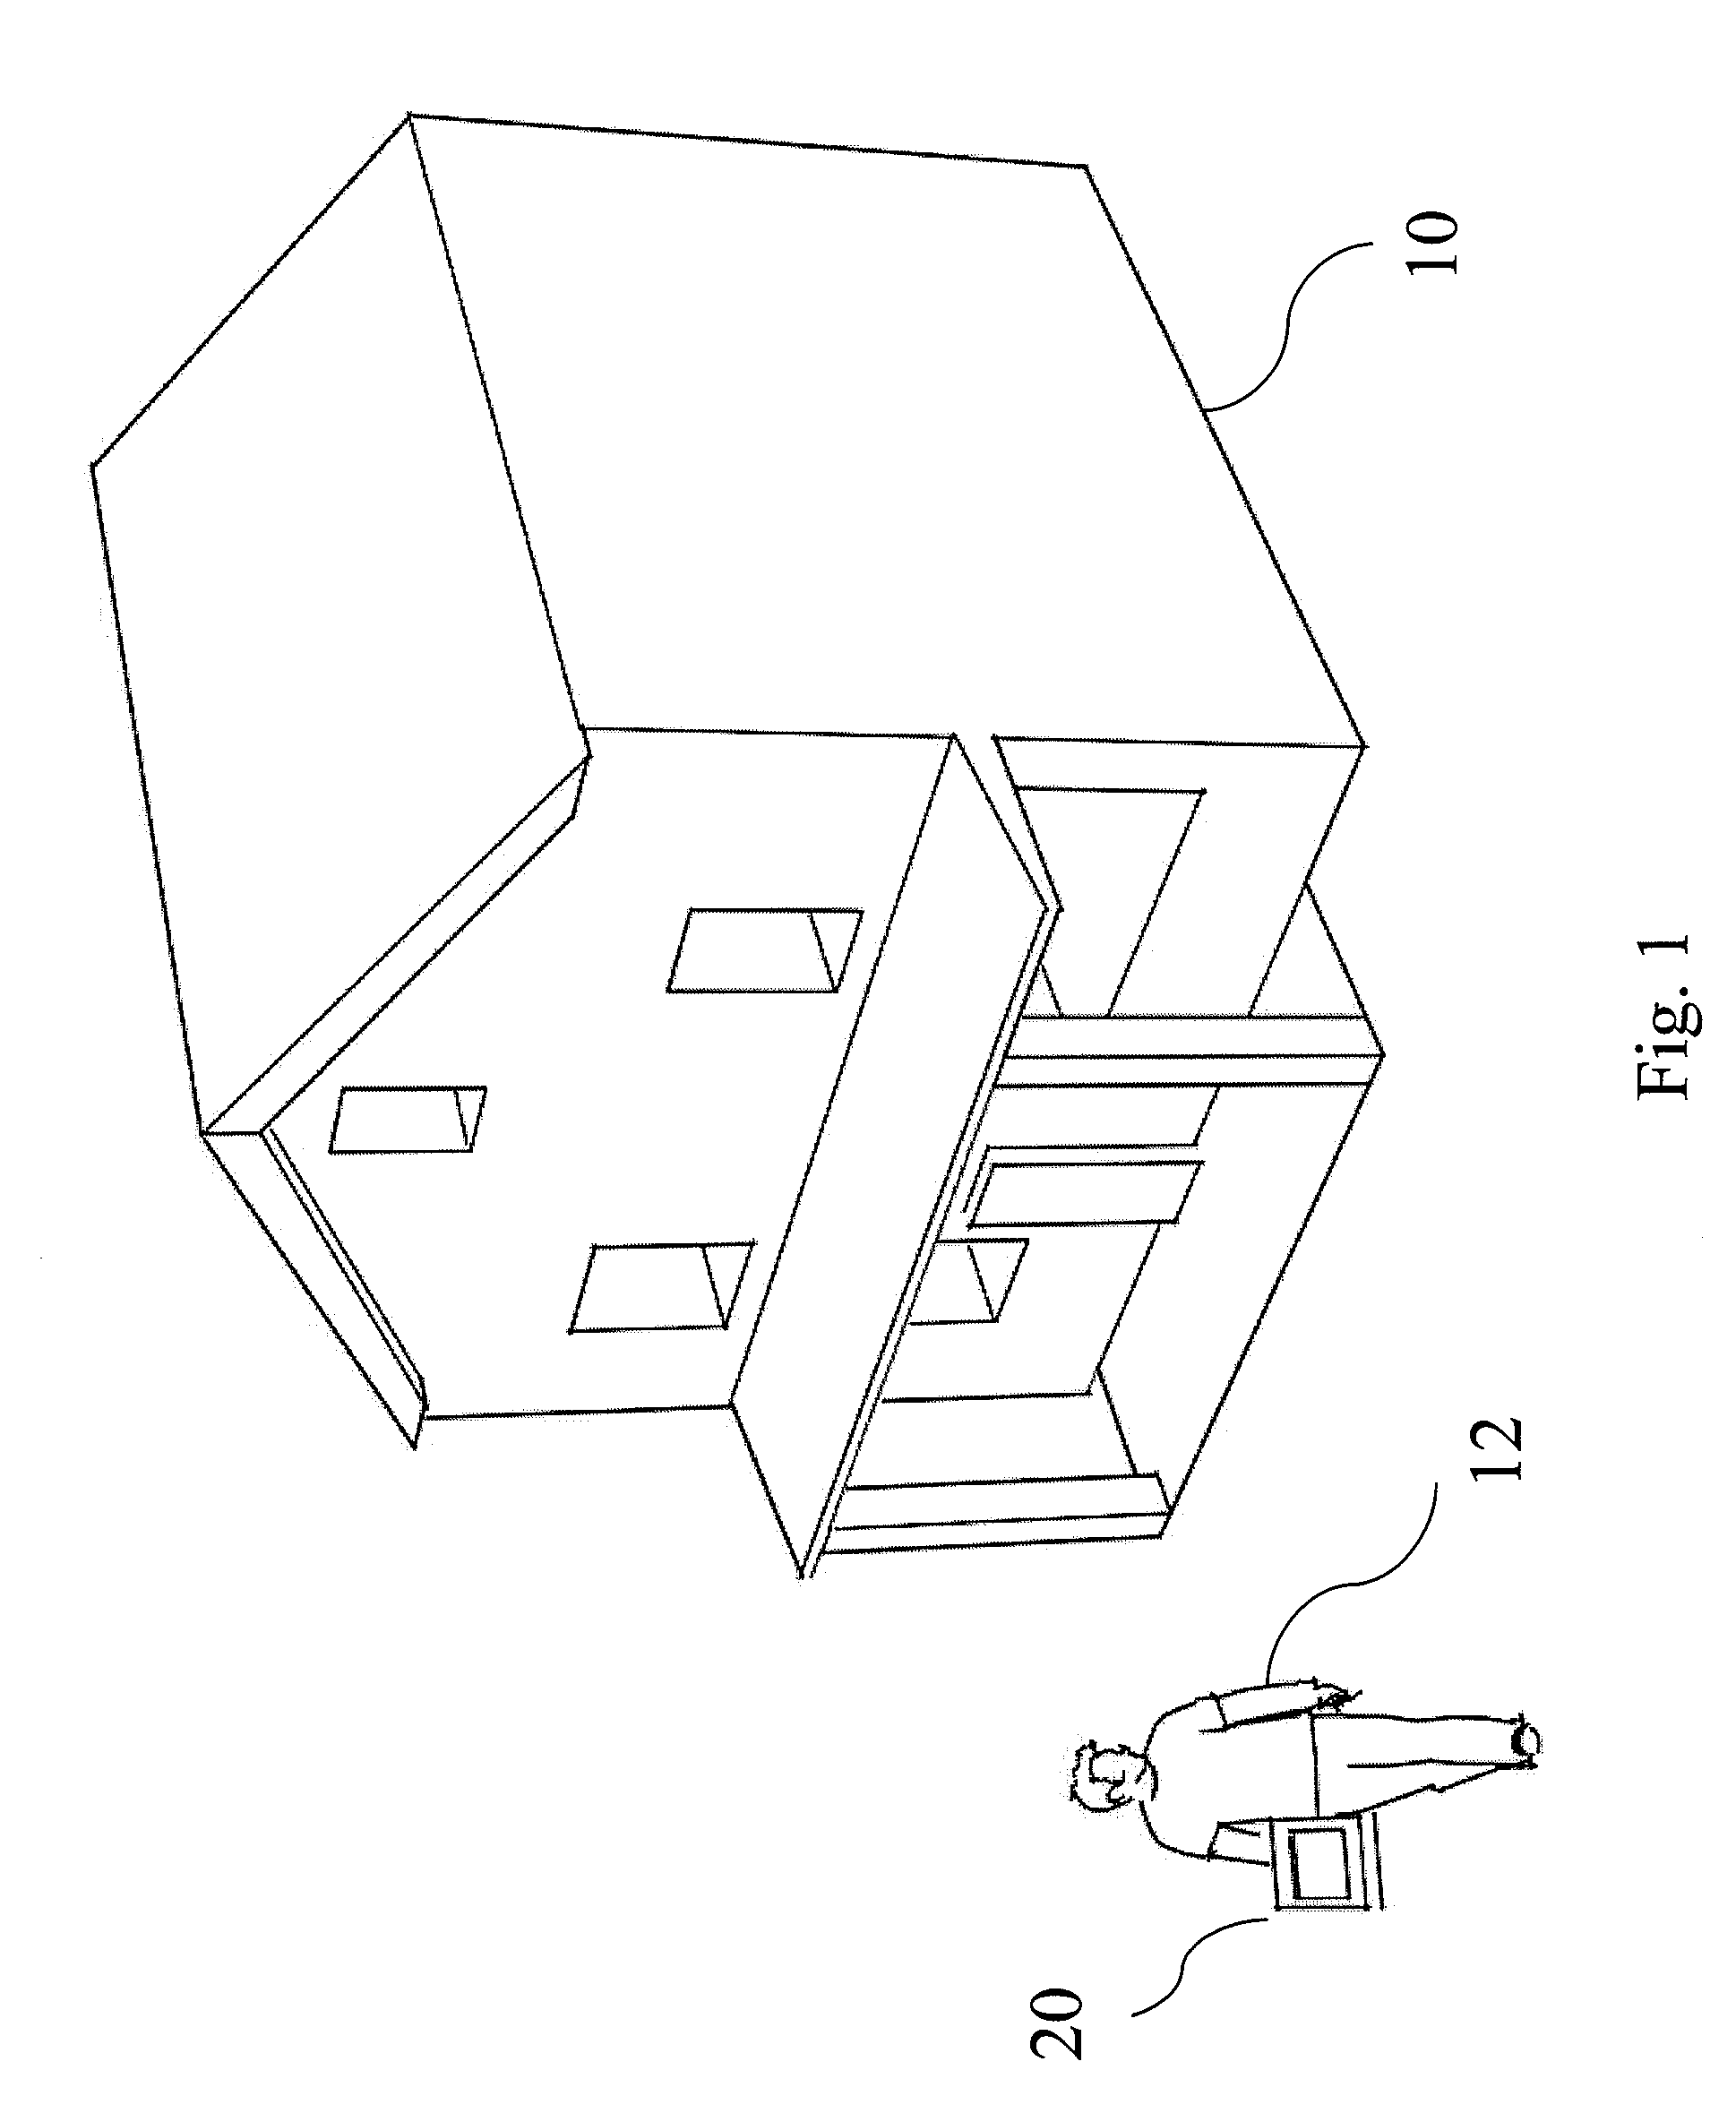 Method and apparatus for rapid surveying of static structures